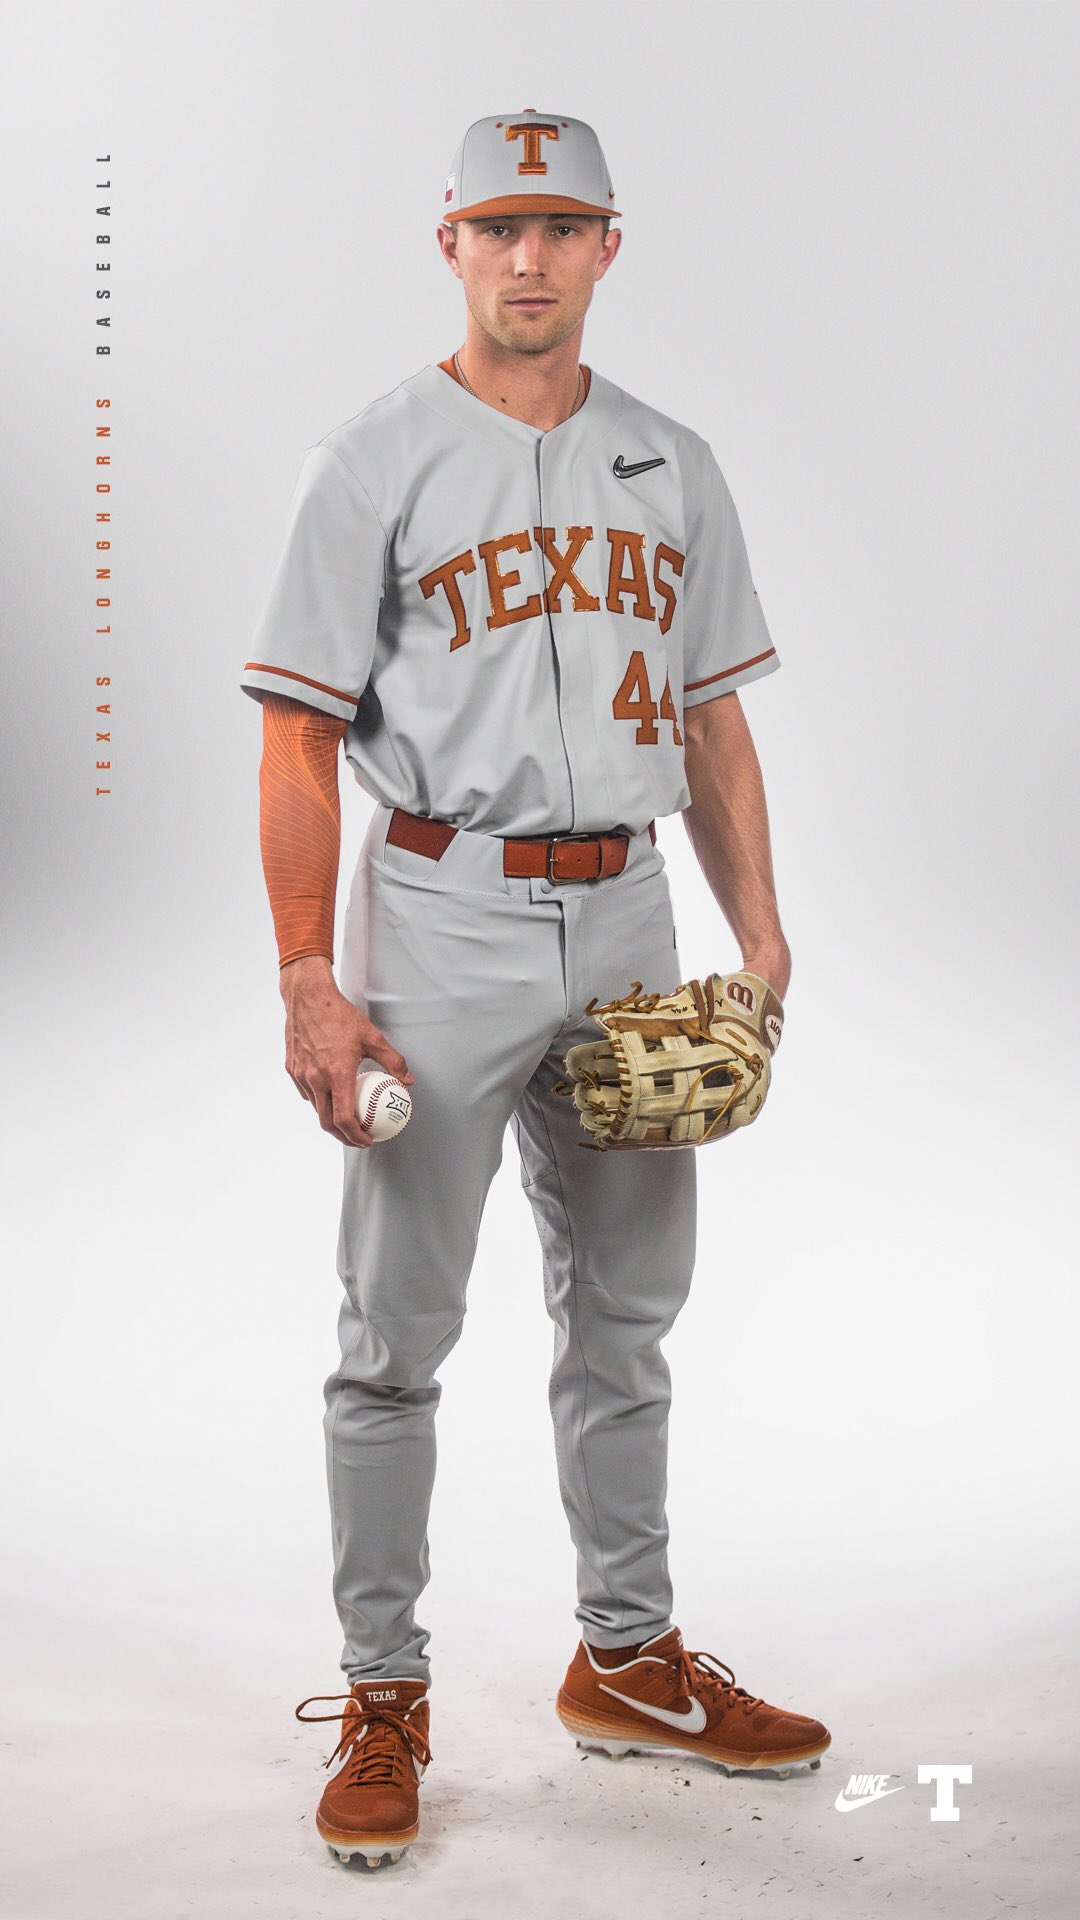 Texas Baseball on X: They'll see us coming. Road warriors